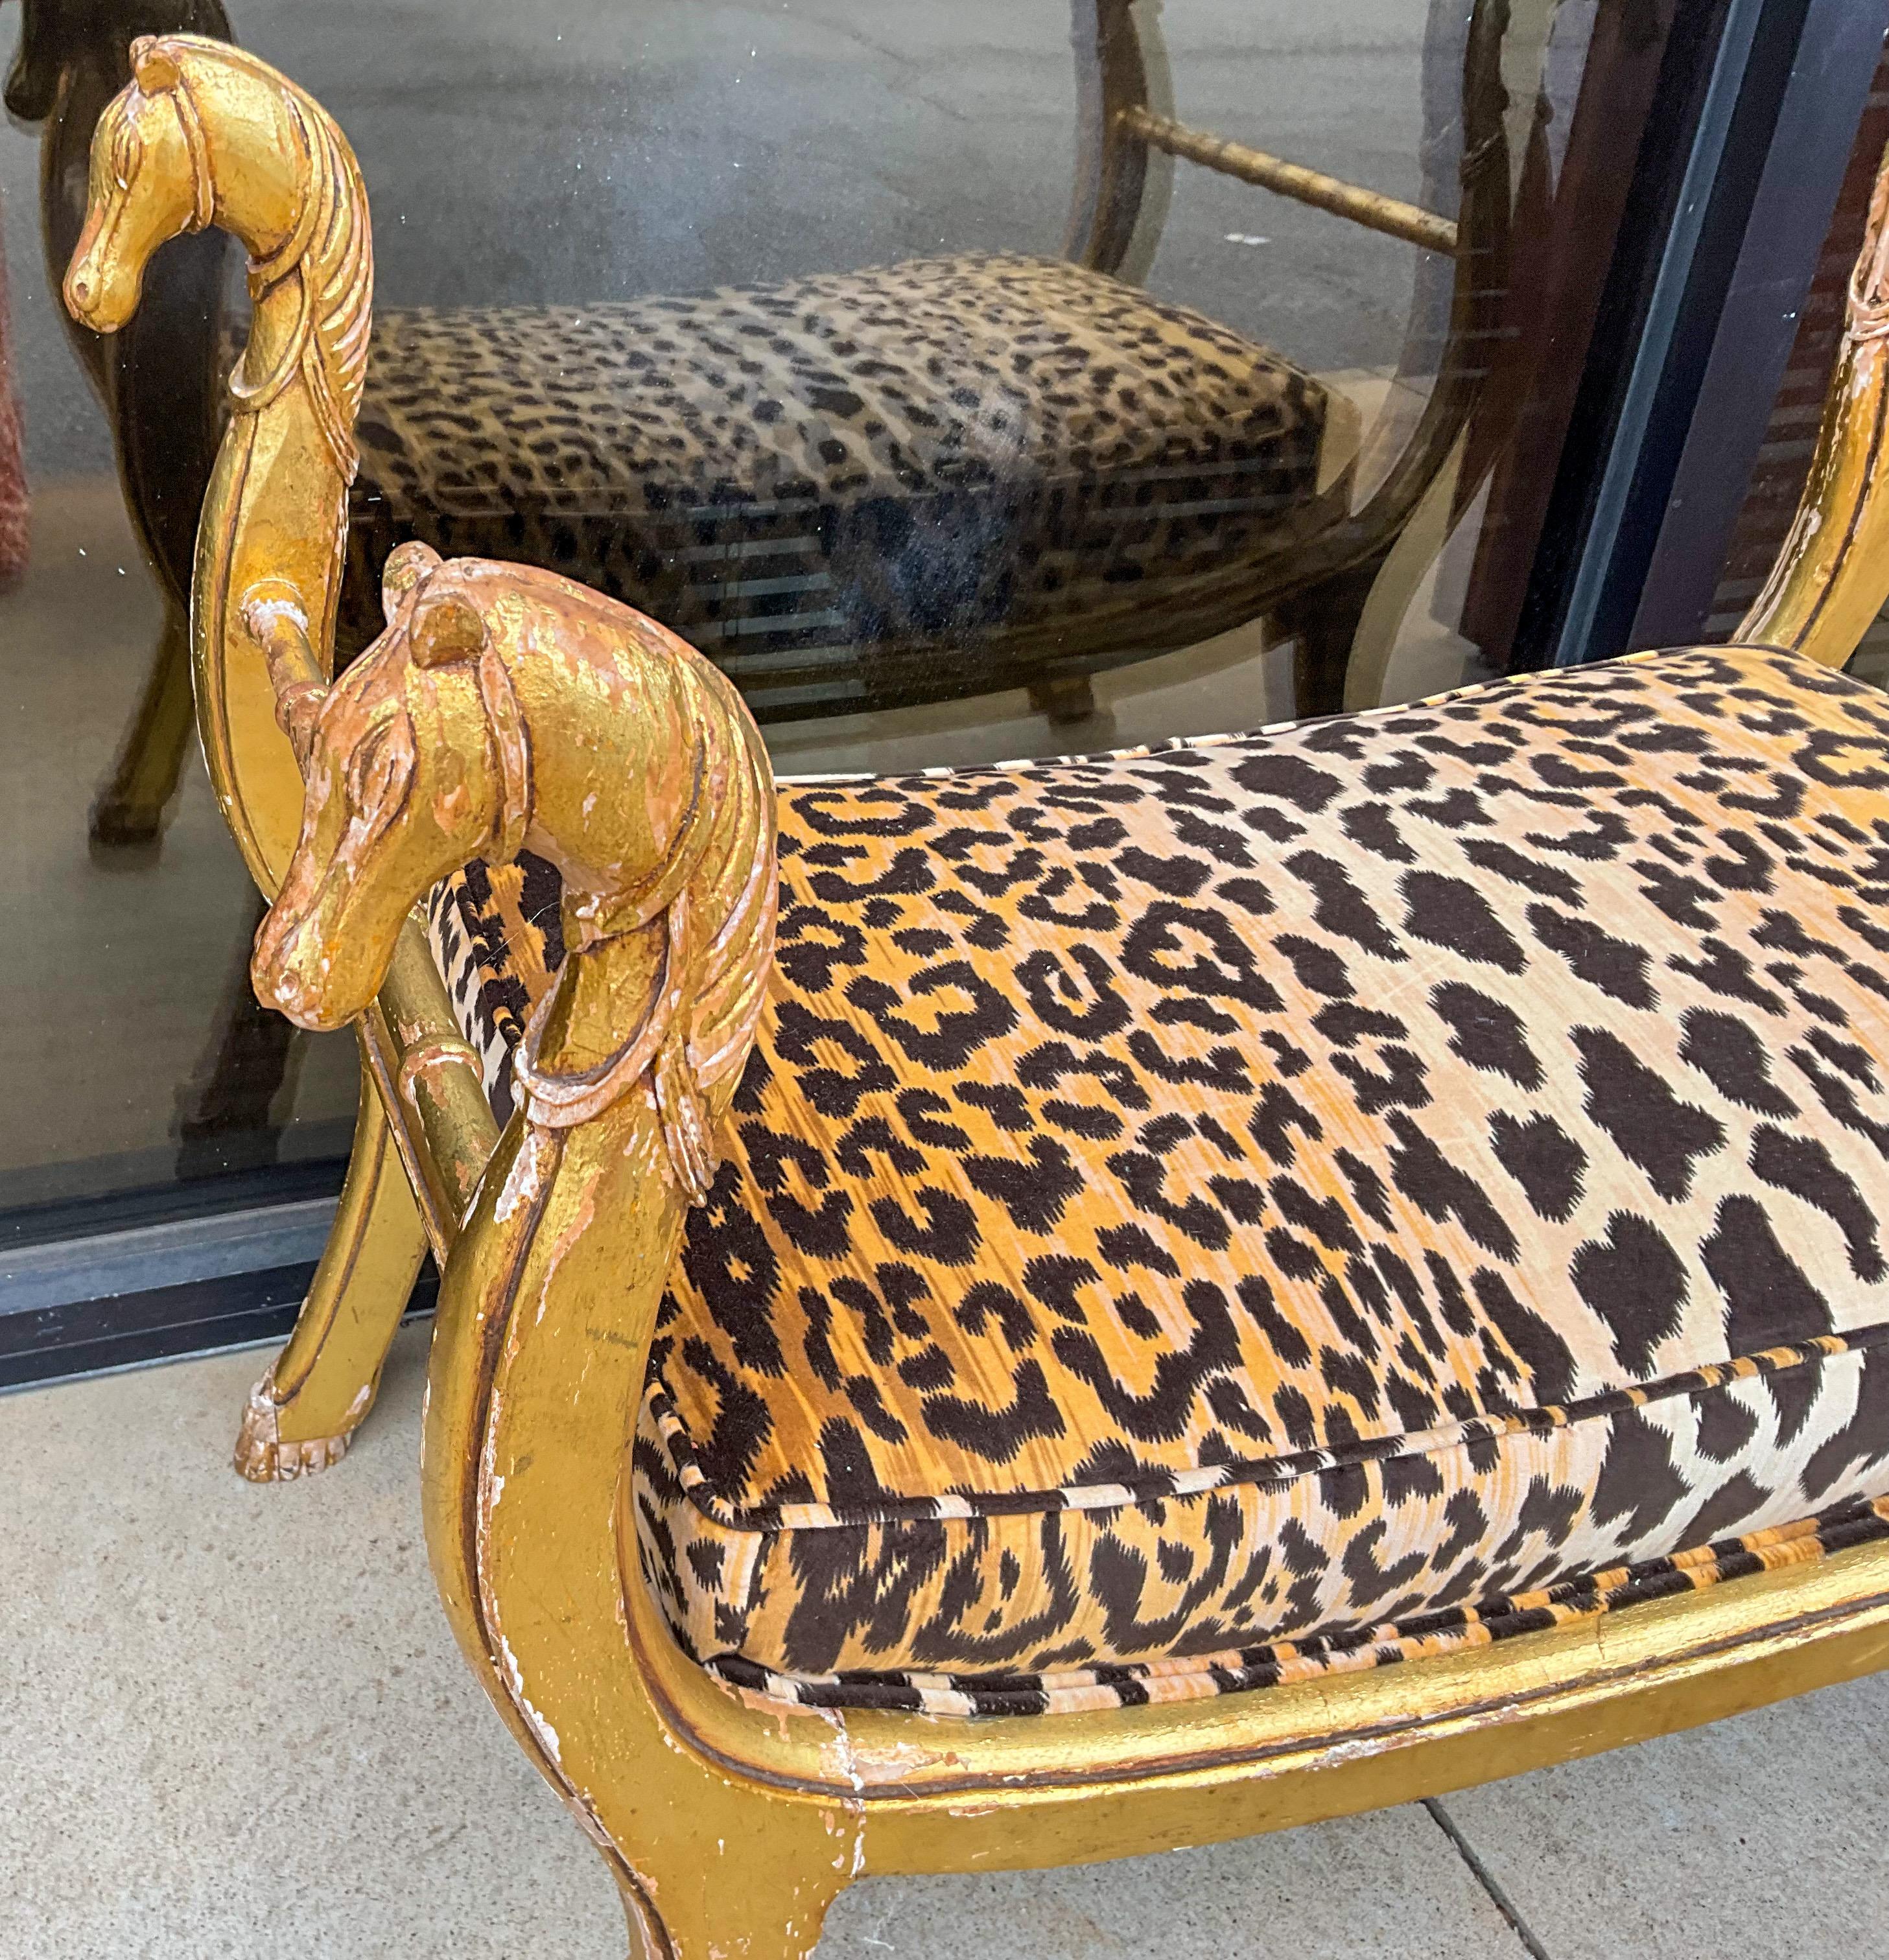 20th Century 19th-C. Neo-Classical Maison Jansen Style Giltwood Bench In Leopard Velvet  For Sale